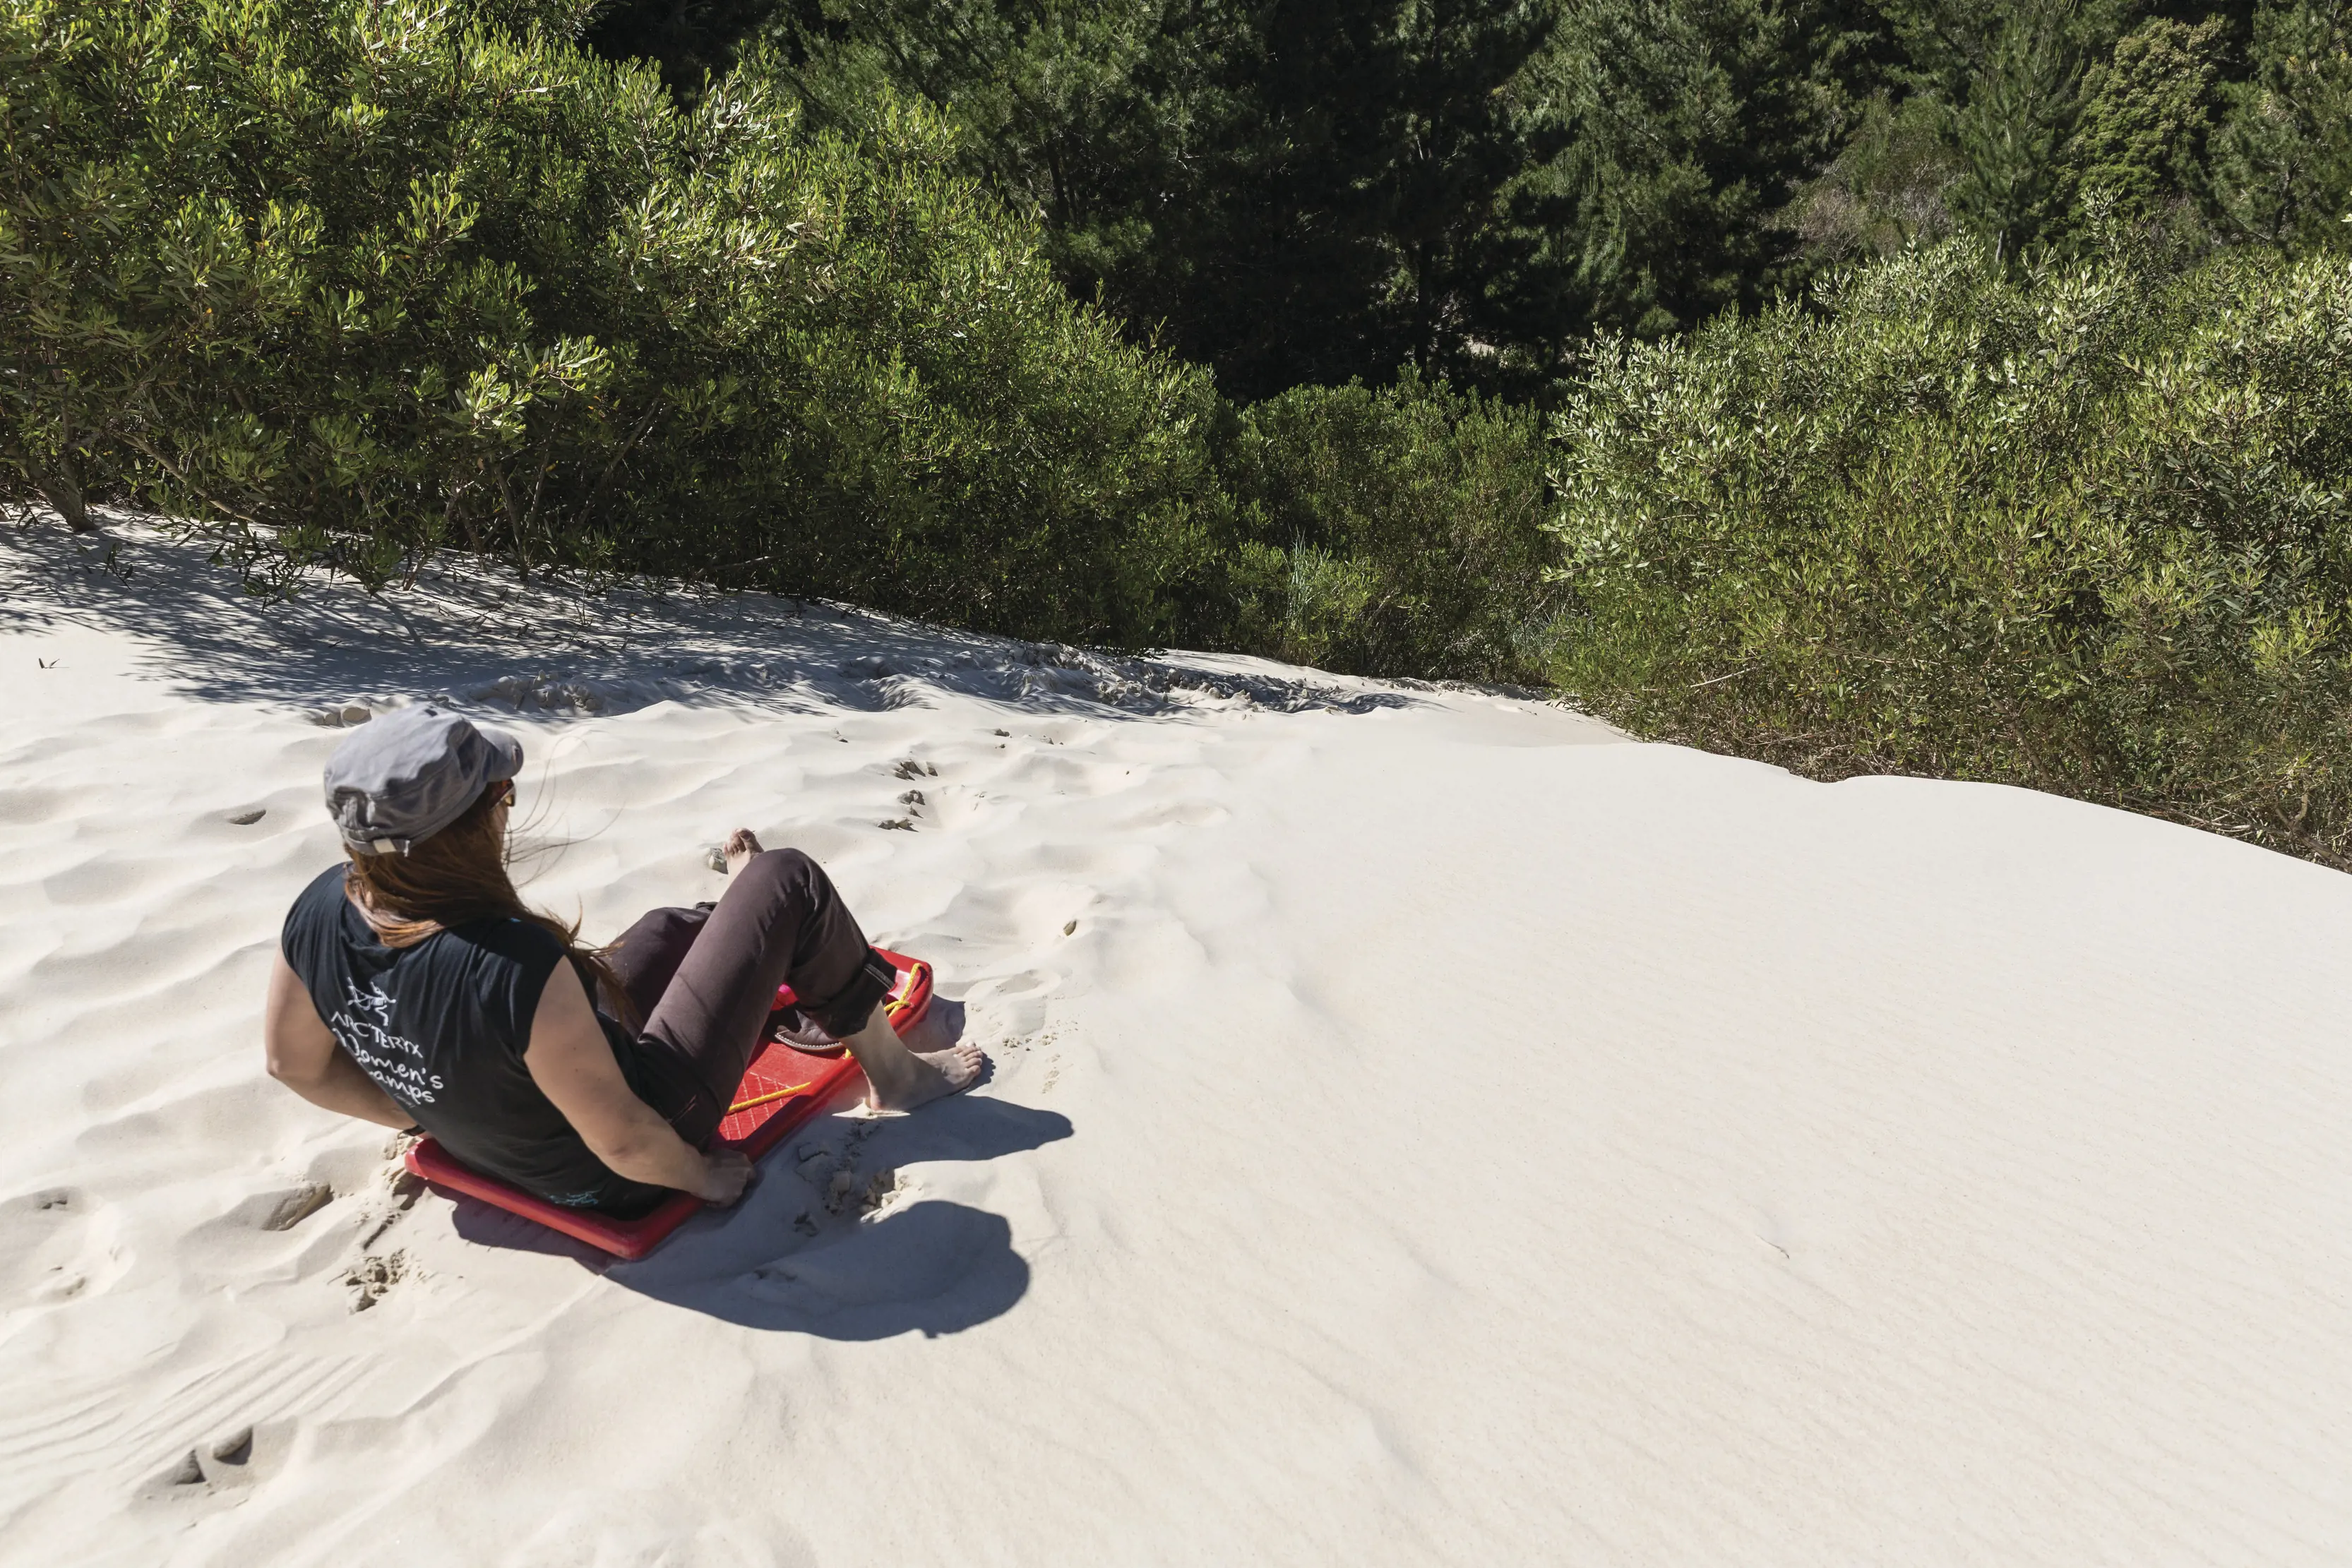 A woman enjoys tobogganing at Henty Dunes, riding down the sand dunes on a red board.